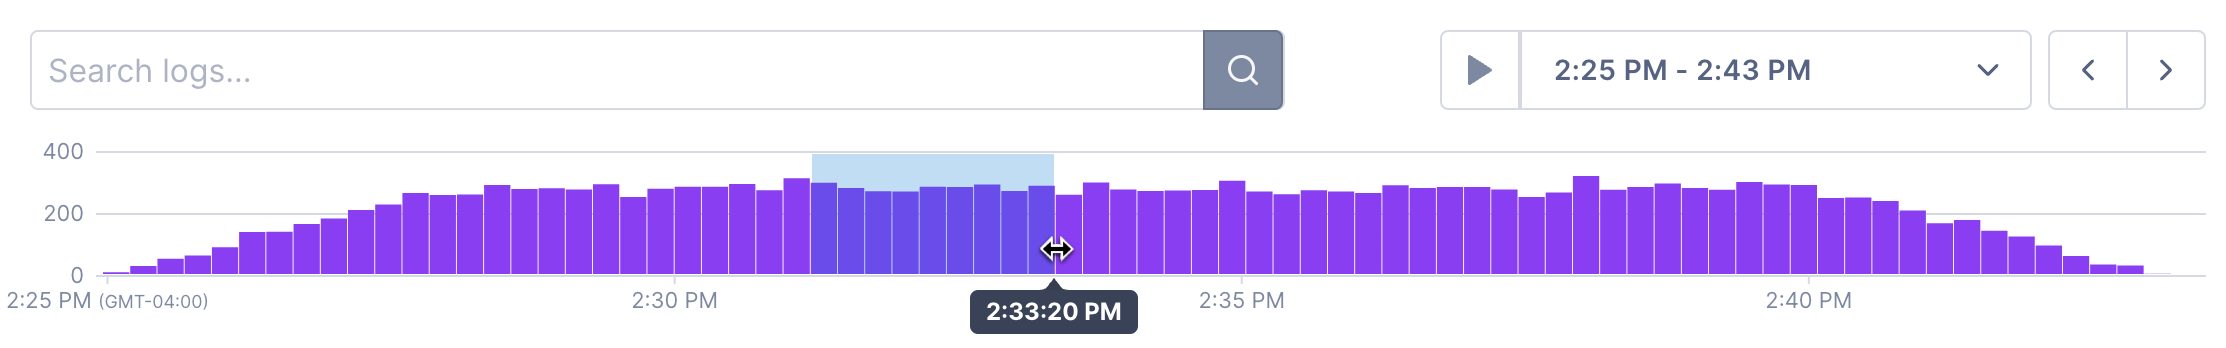 Click and drag to select time ranges